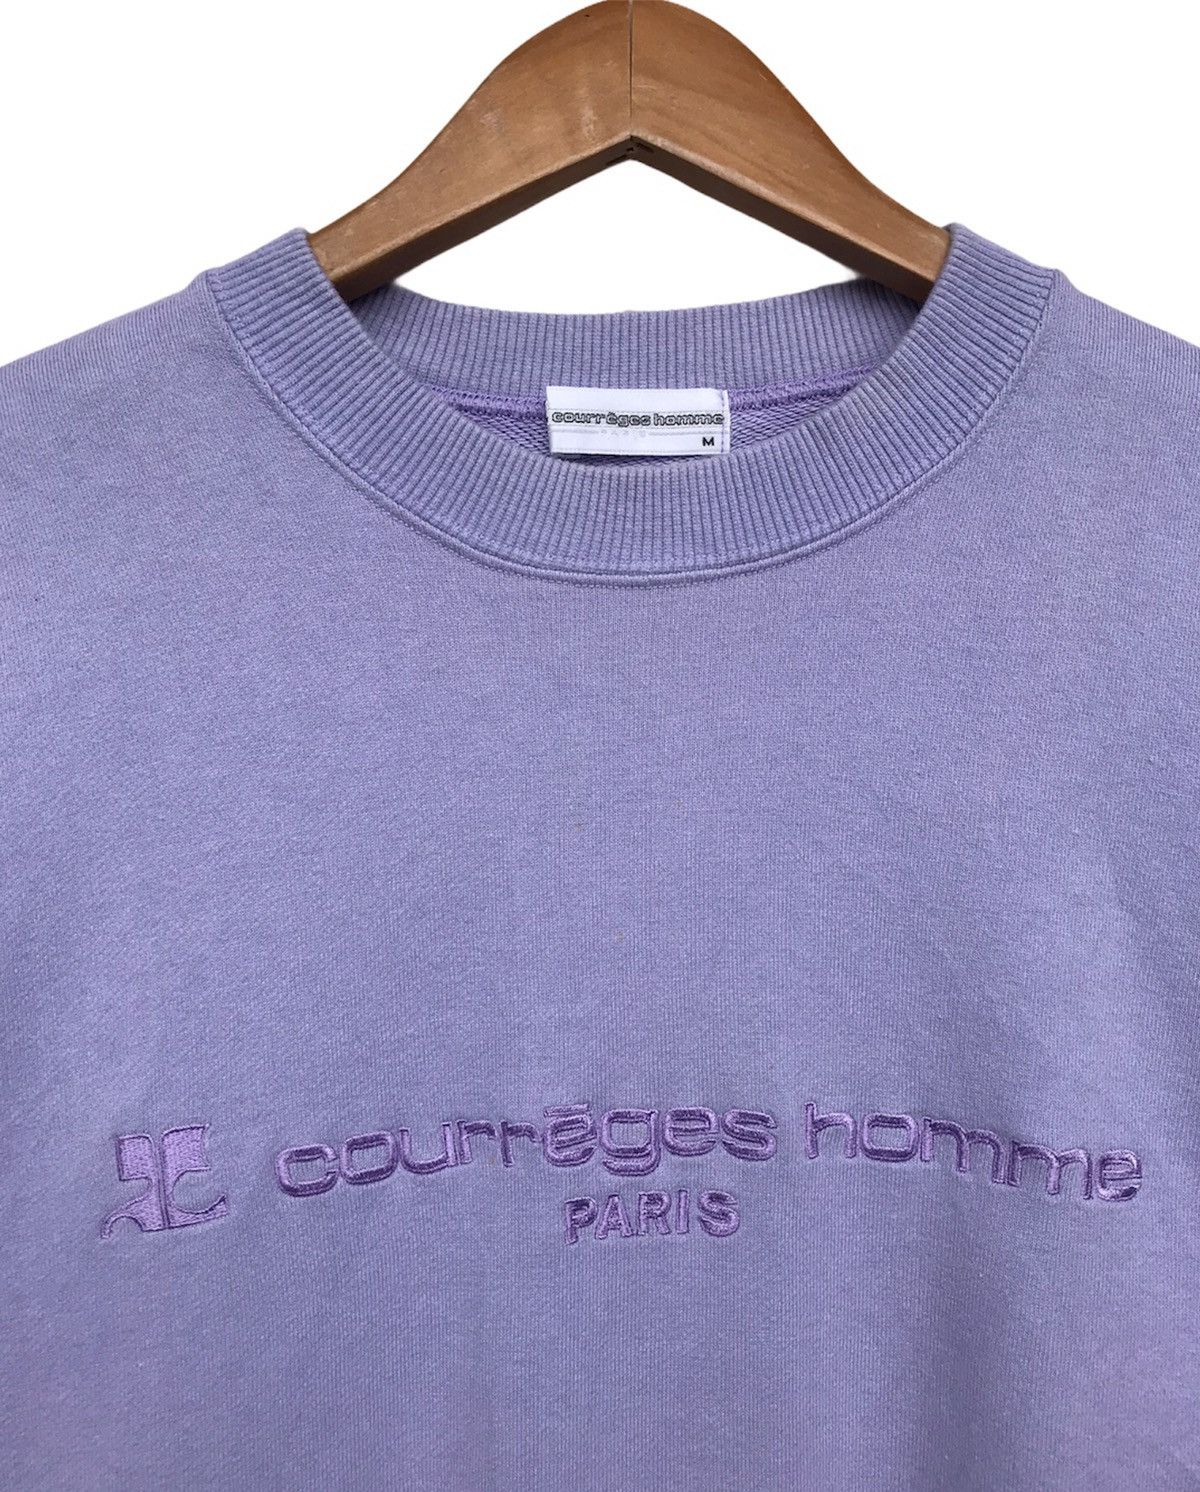 Japanese Brand - Courreages Spellout Embroidered Lilac Sweatshirt - 2